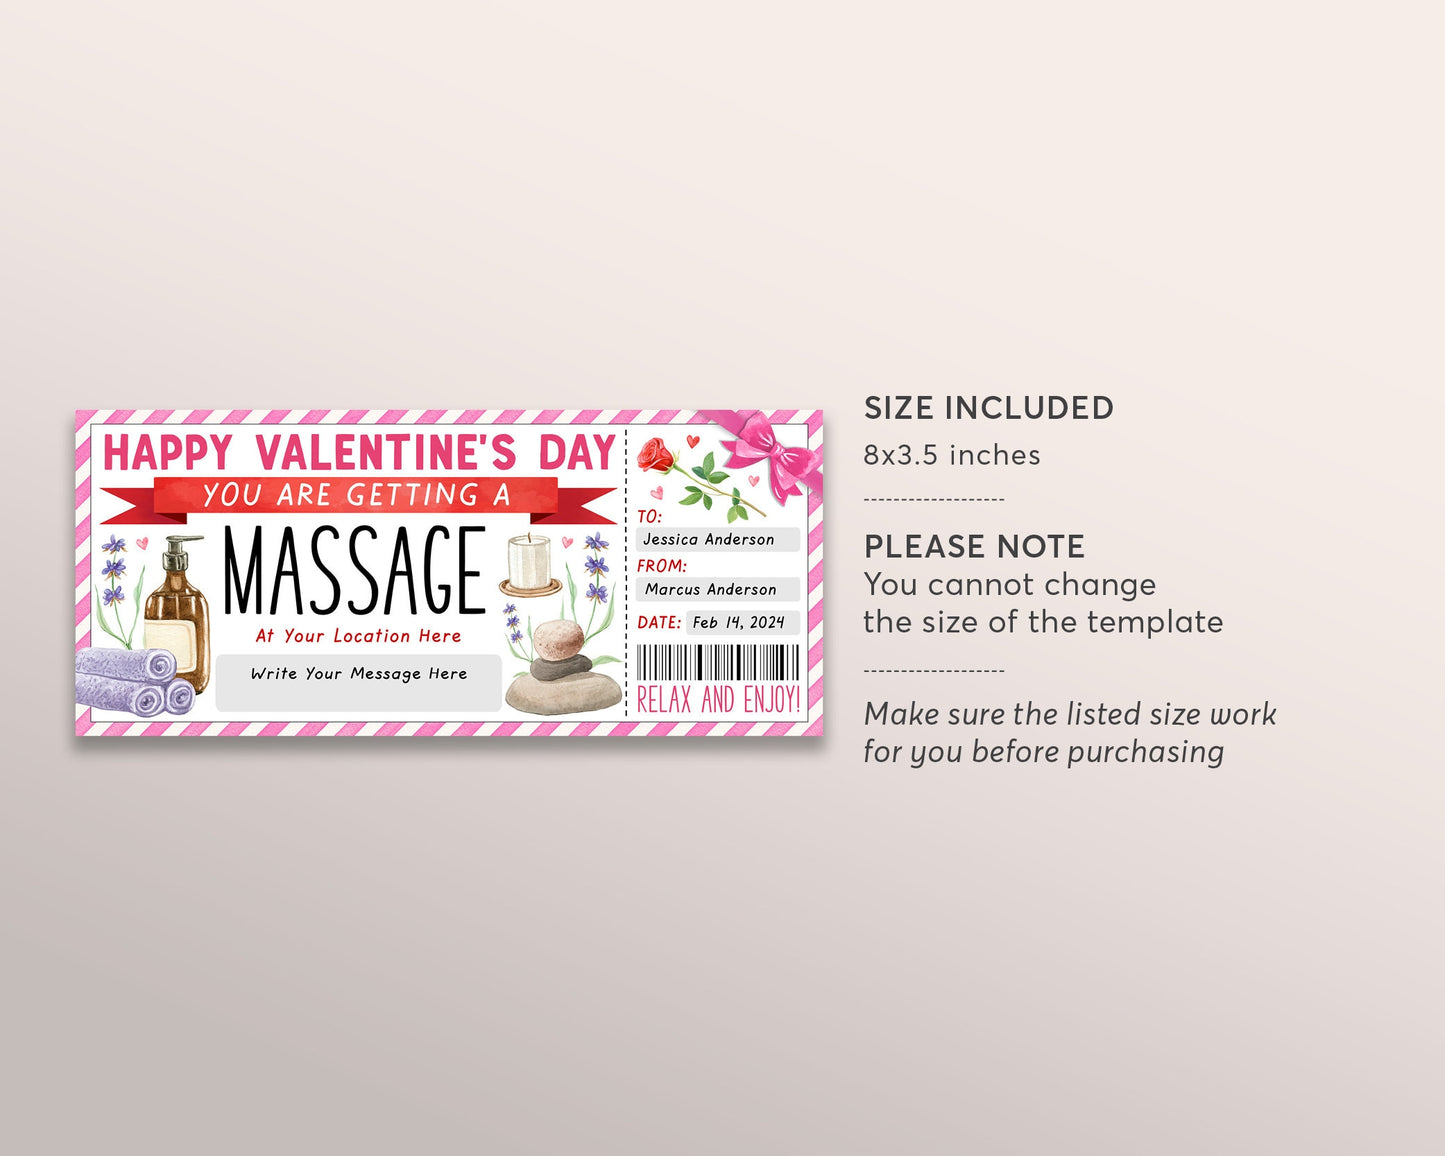 Valentines Day Massage Gift Certificate Ticket Editable Template, Anniversary Surprise Salon Spa Day Treatment Gift Voucher Coupon For Her